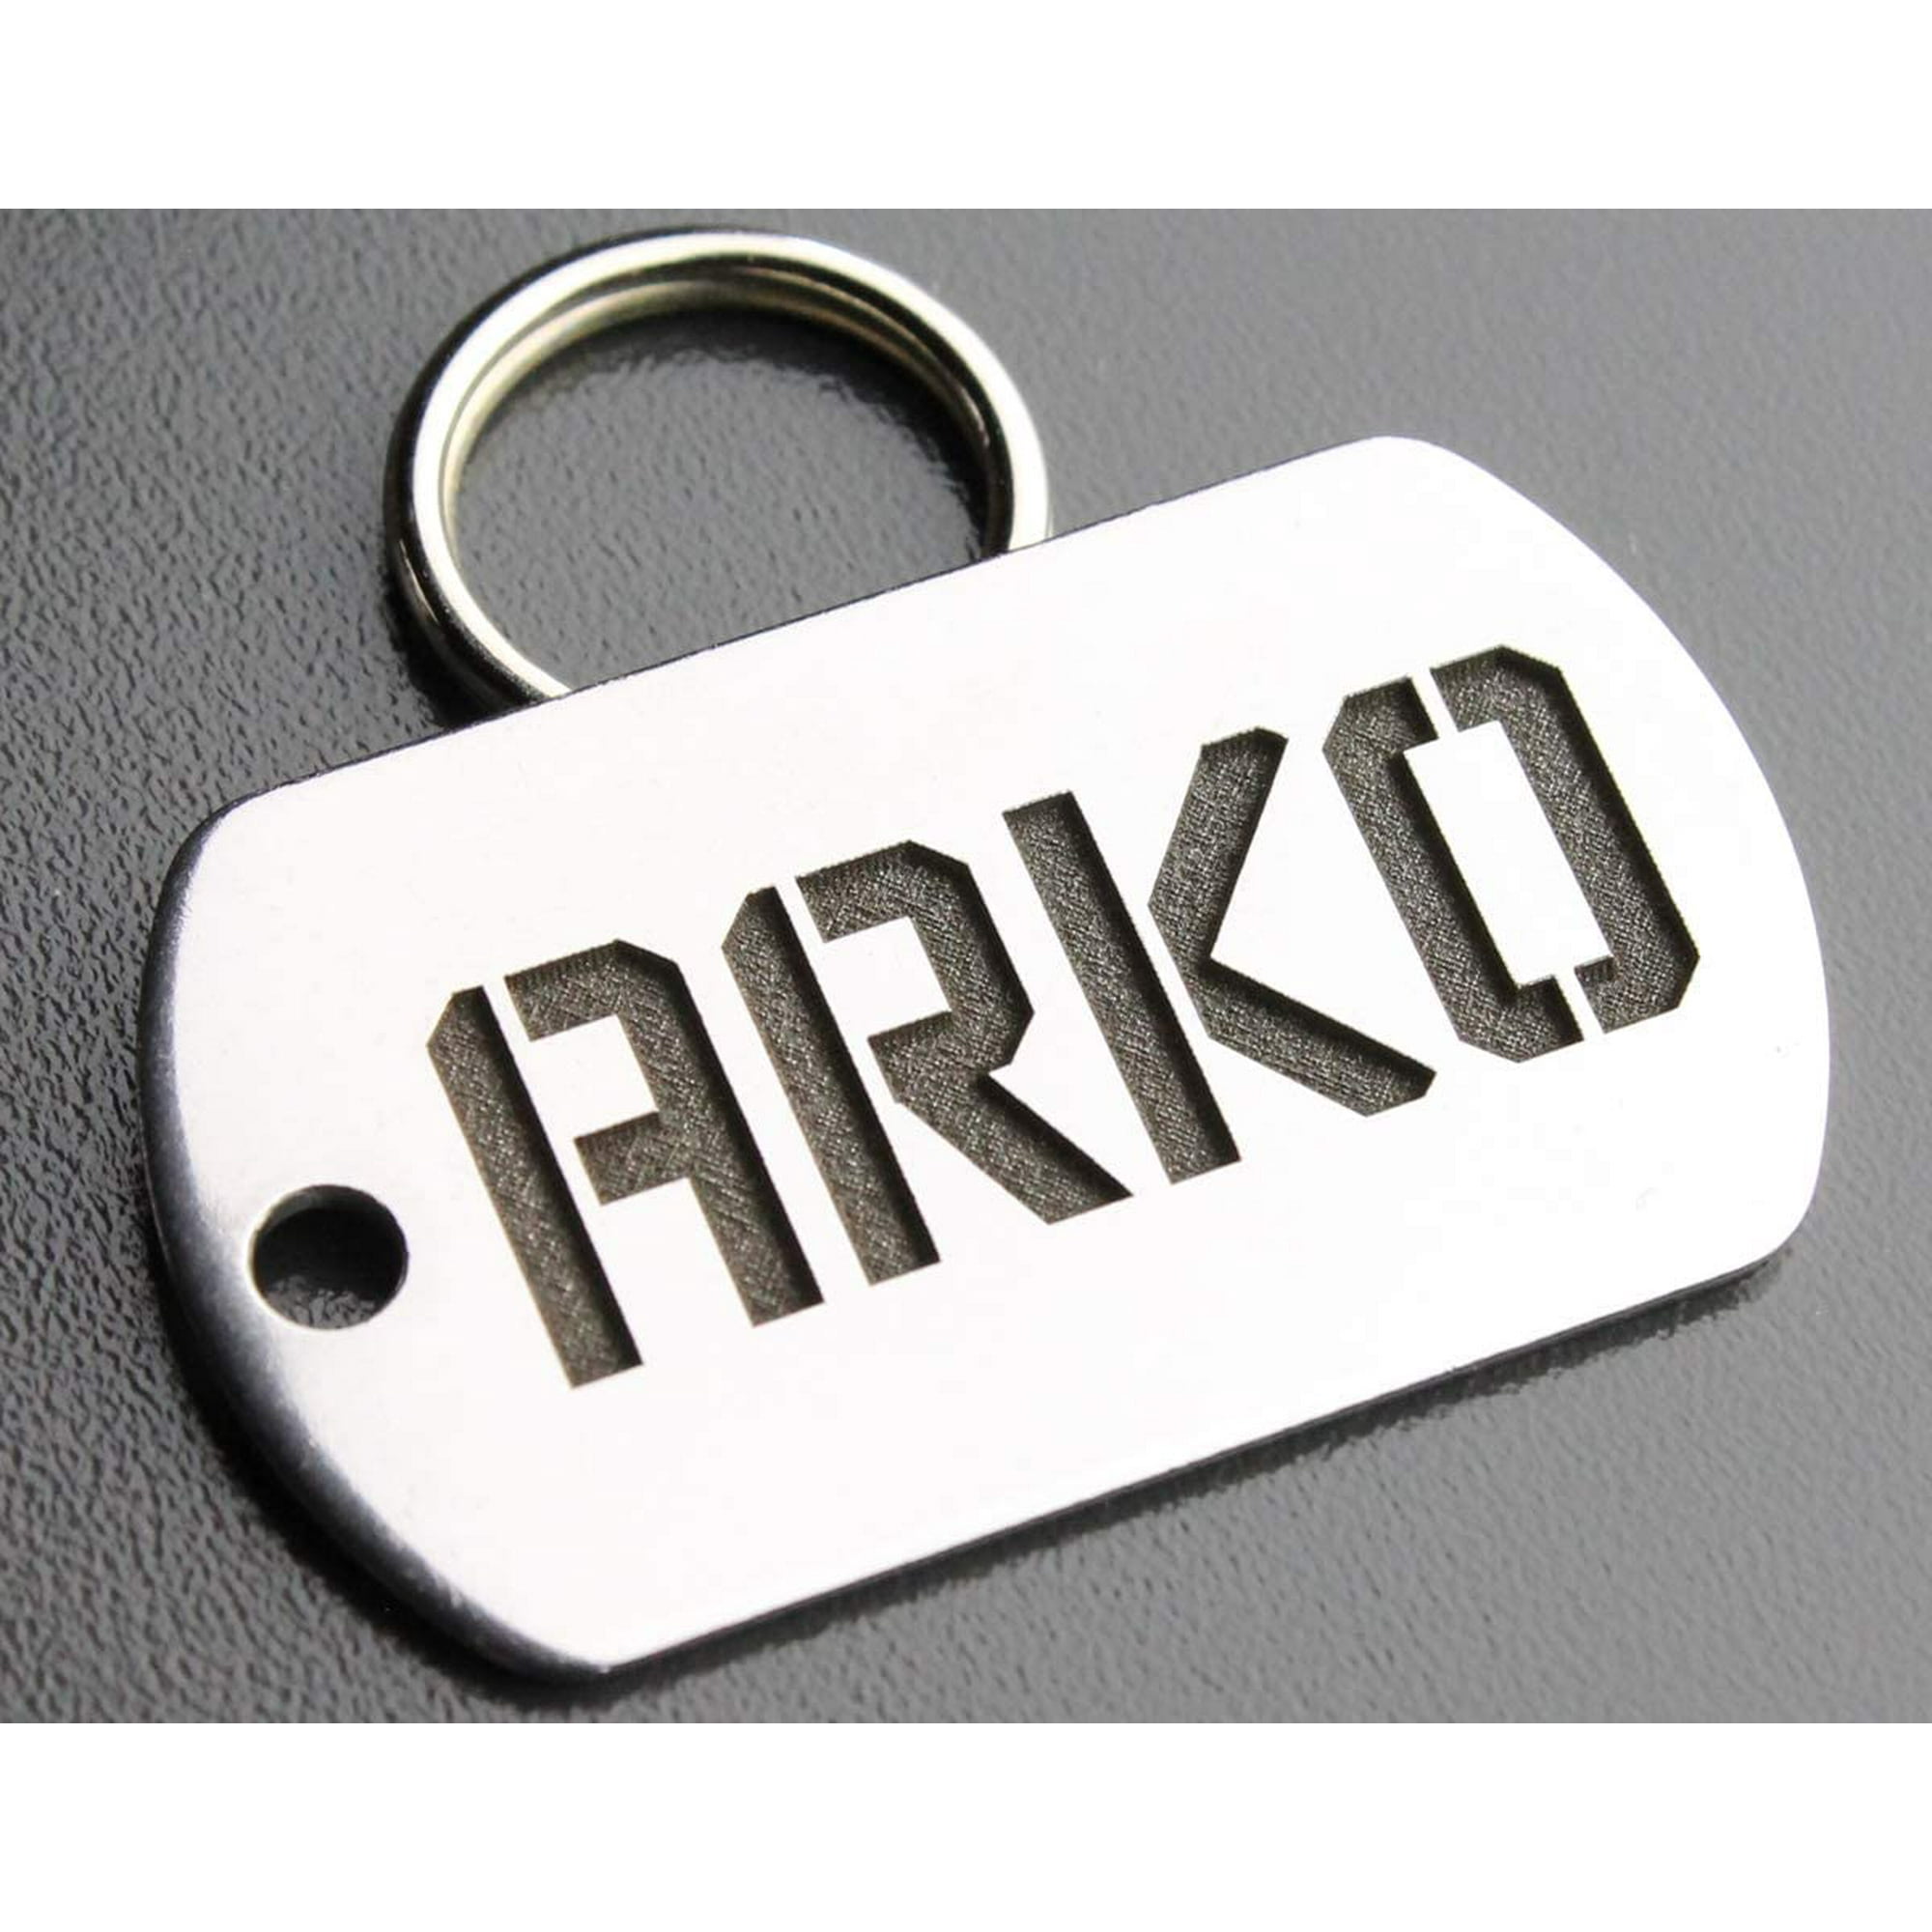 Deep Engraved Stainless Steel Pet ID Tag - Rectangle (7/8x1-1/4